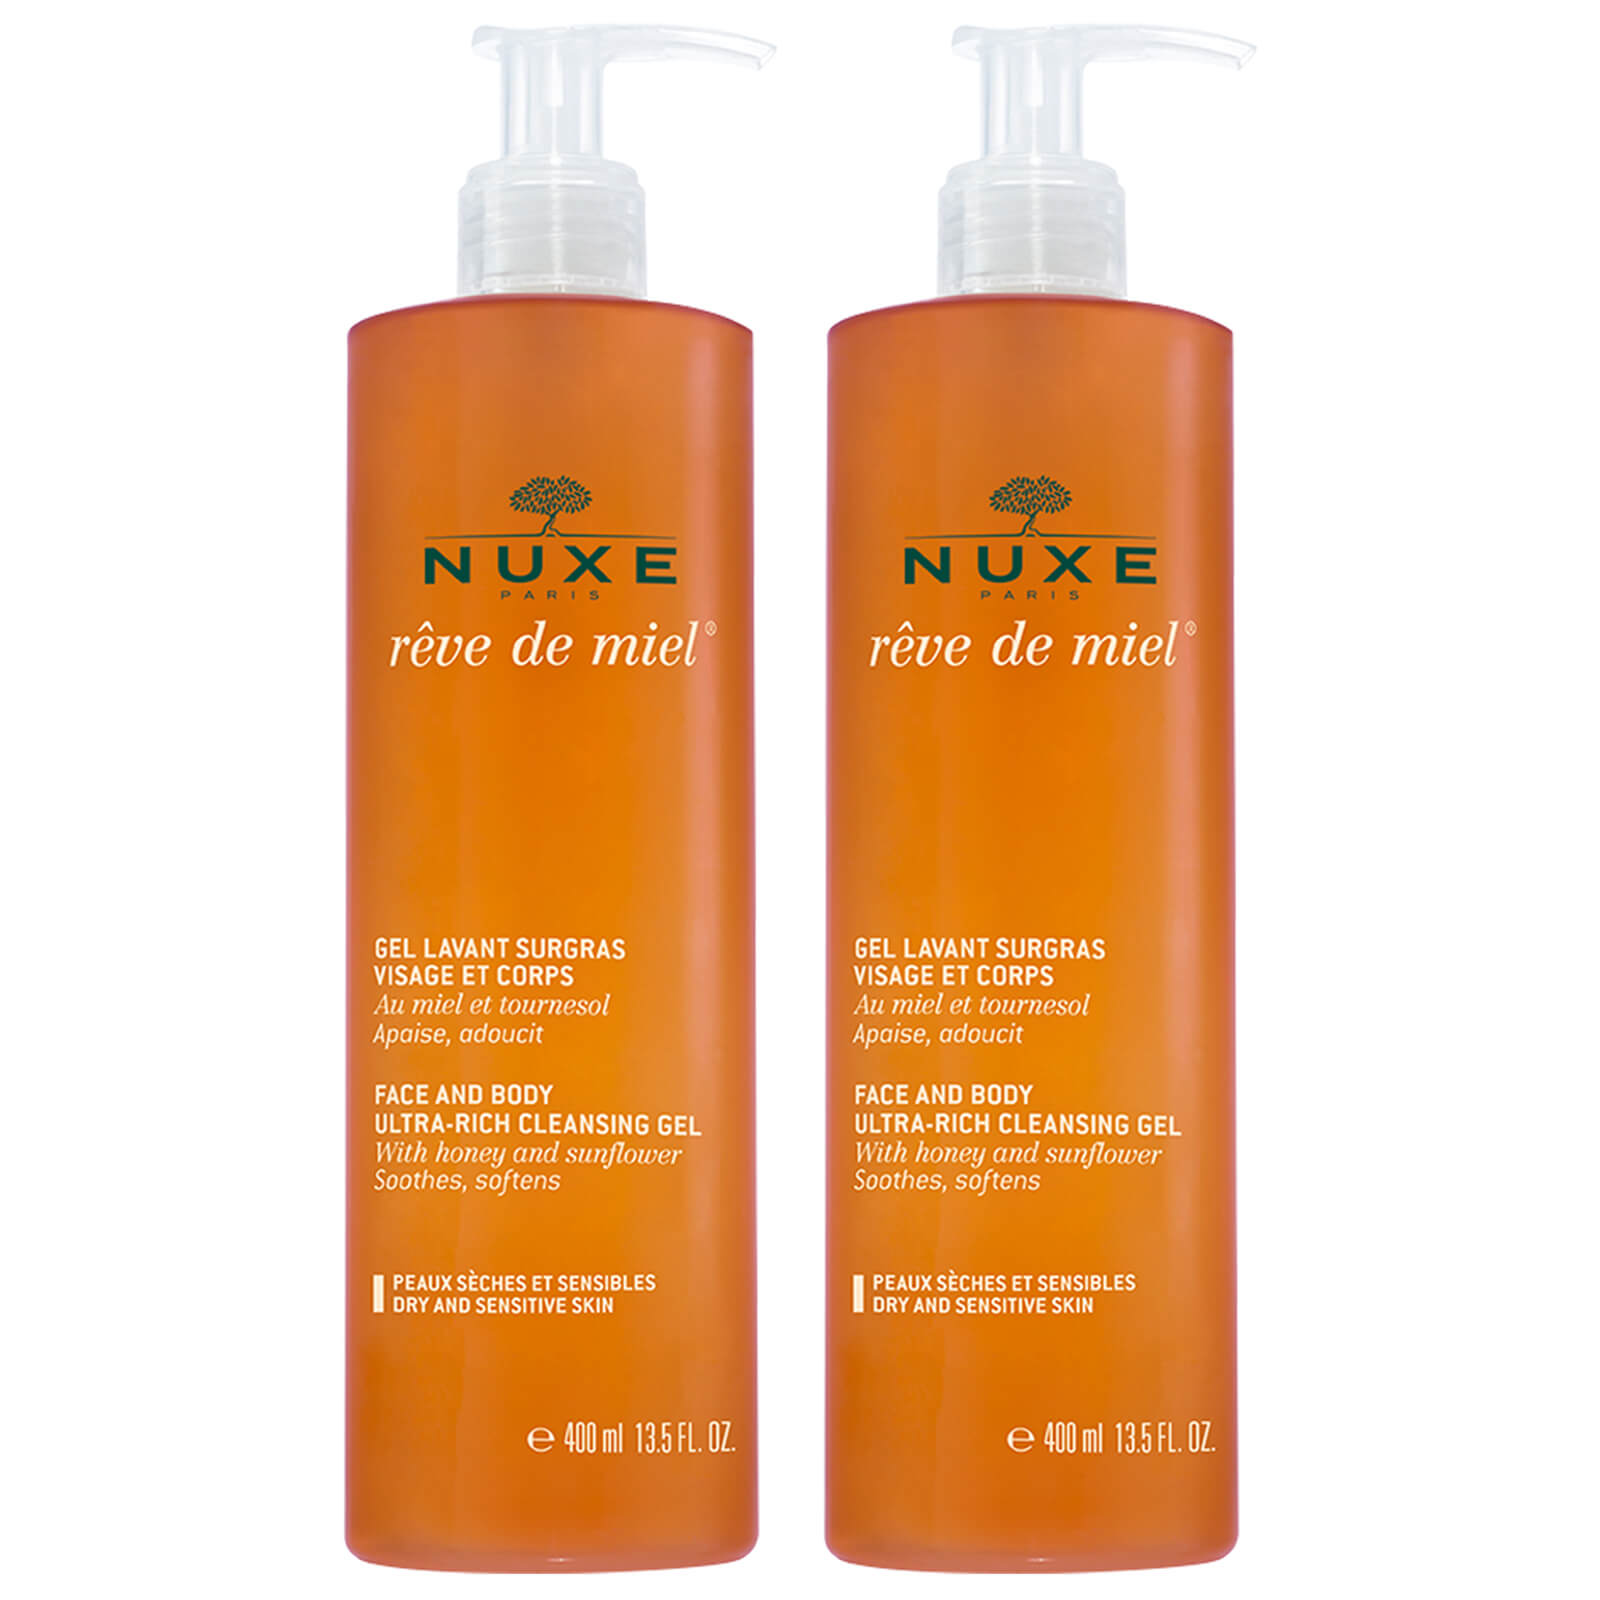 NUXE Rêve de Miel Duo Face and Body Cleansing Gel 2 x 400ml